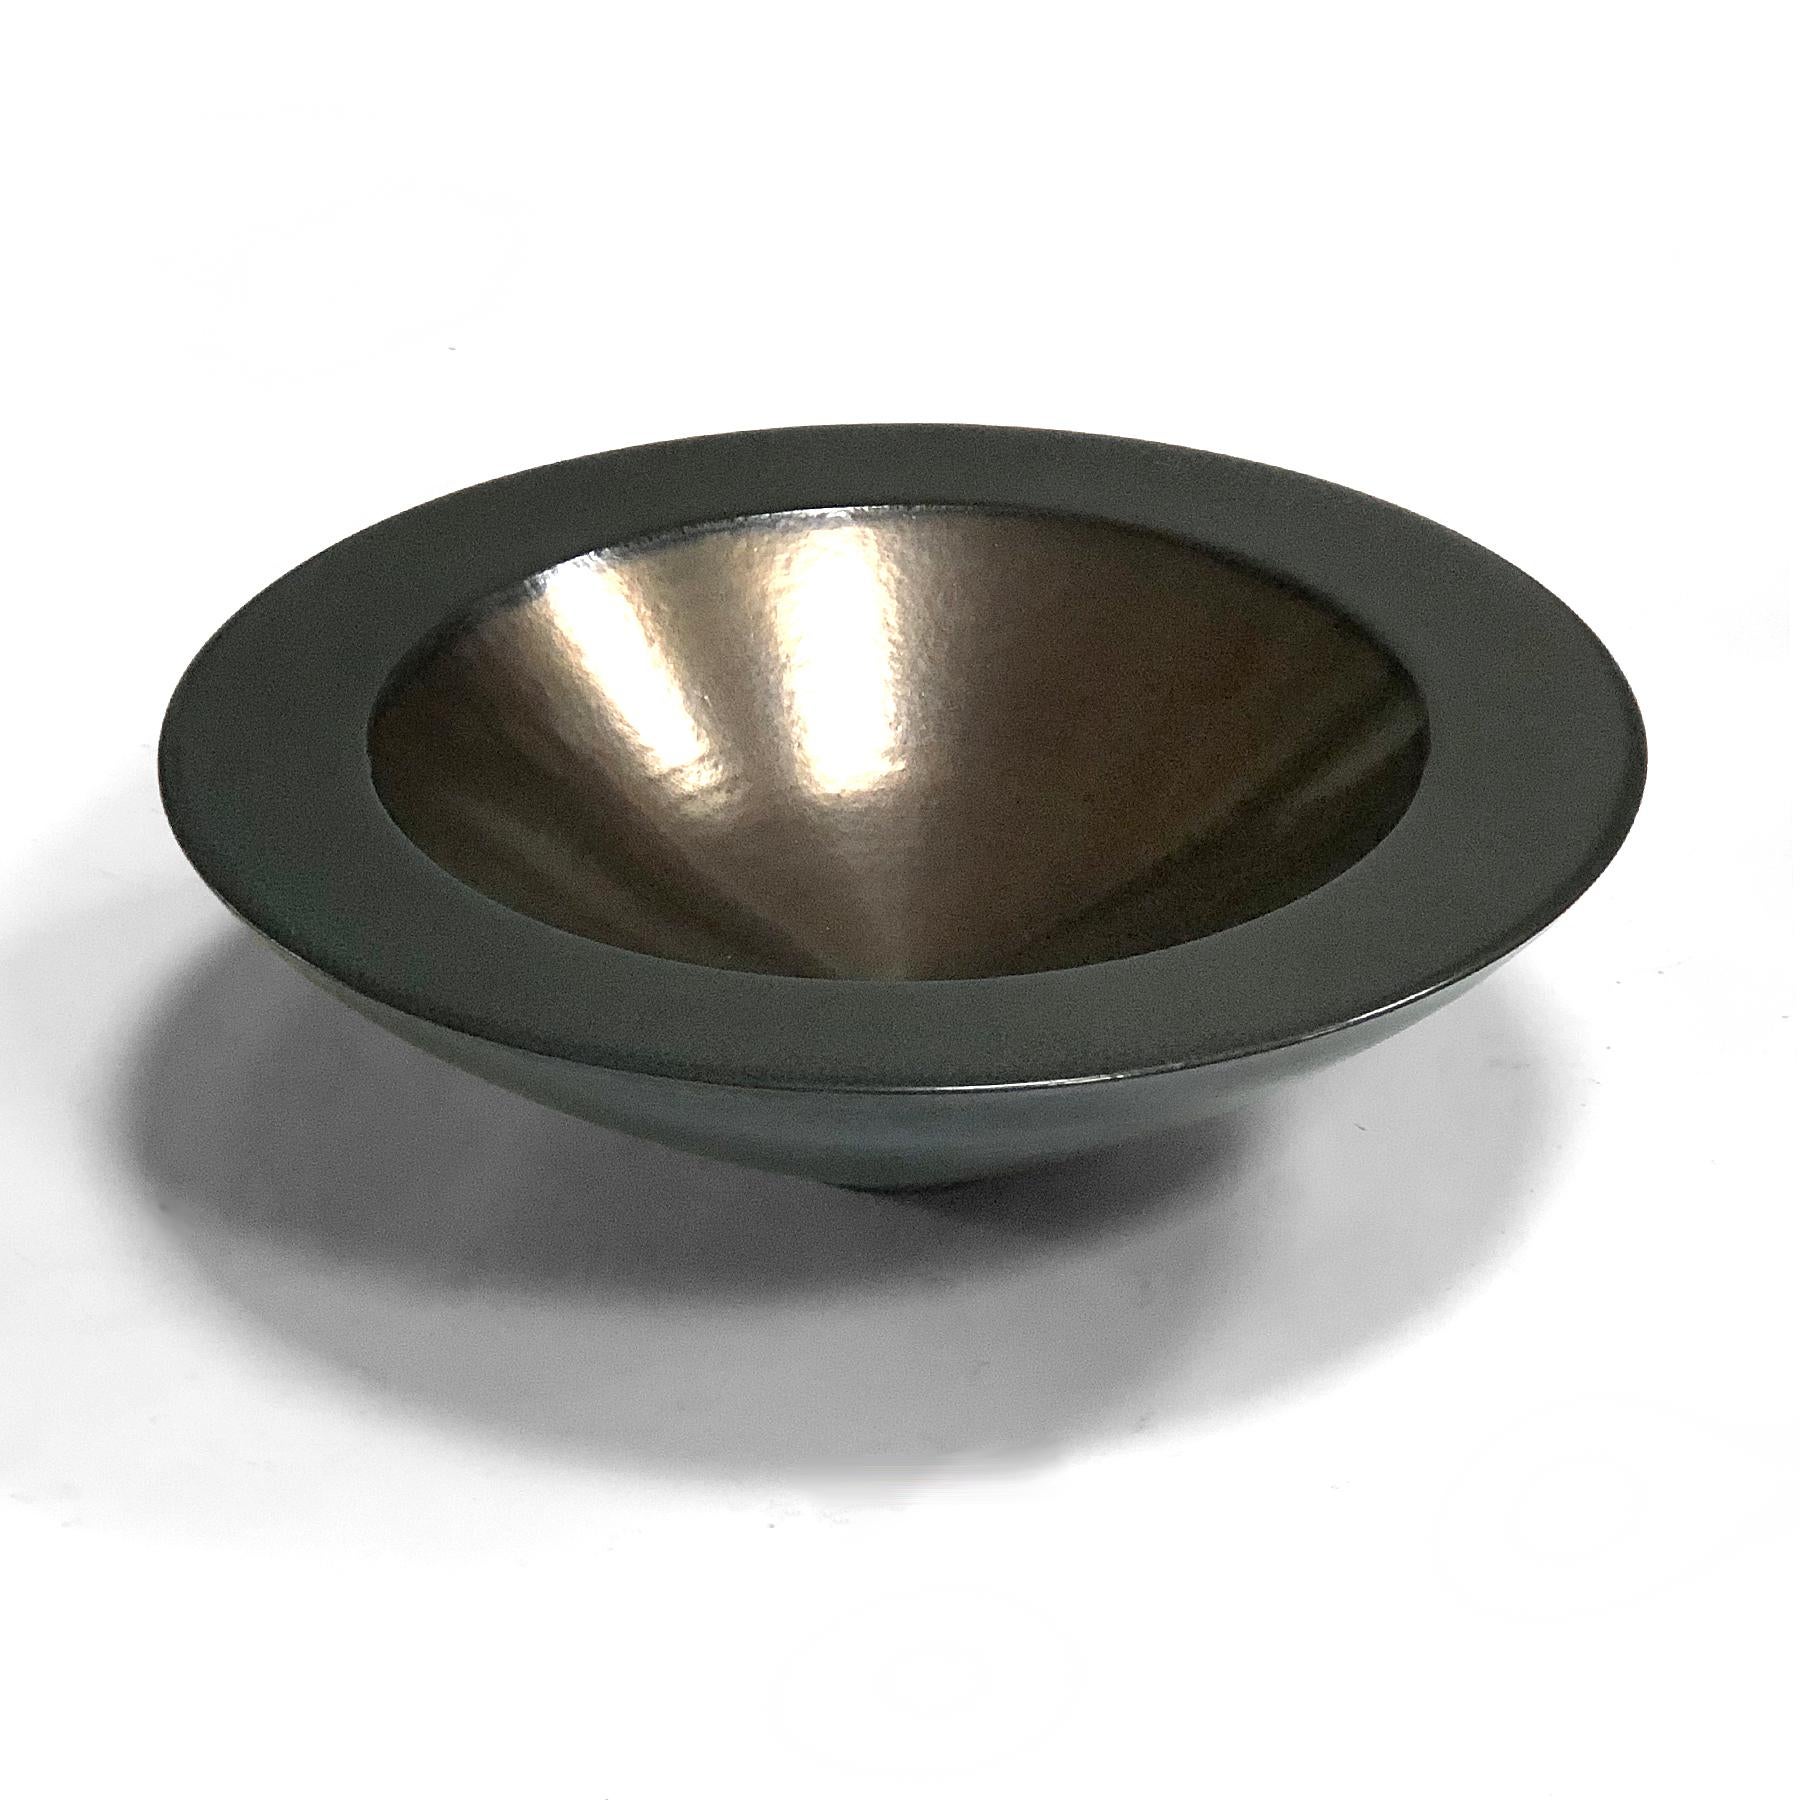 This large and striking bowl by Masuo Ojima (b 1949) has a beautiful deep emerald green glaze on the exterior and gunmetal on the interior. The wonderful physical presence makes it a terrific centerpiece.